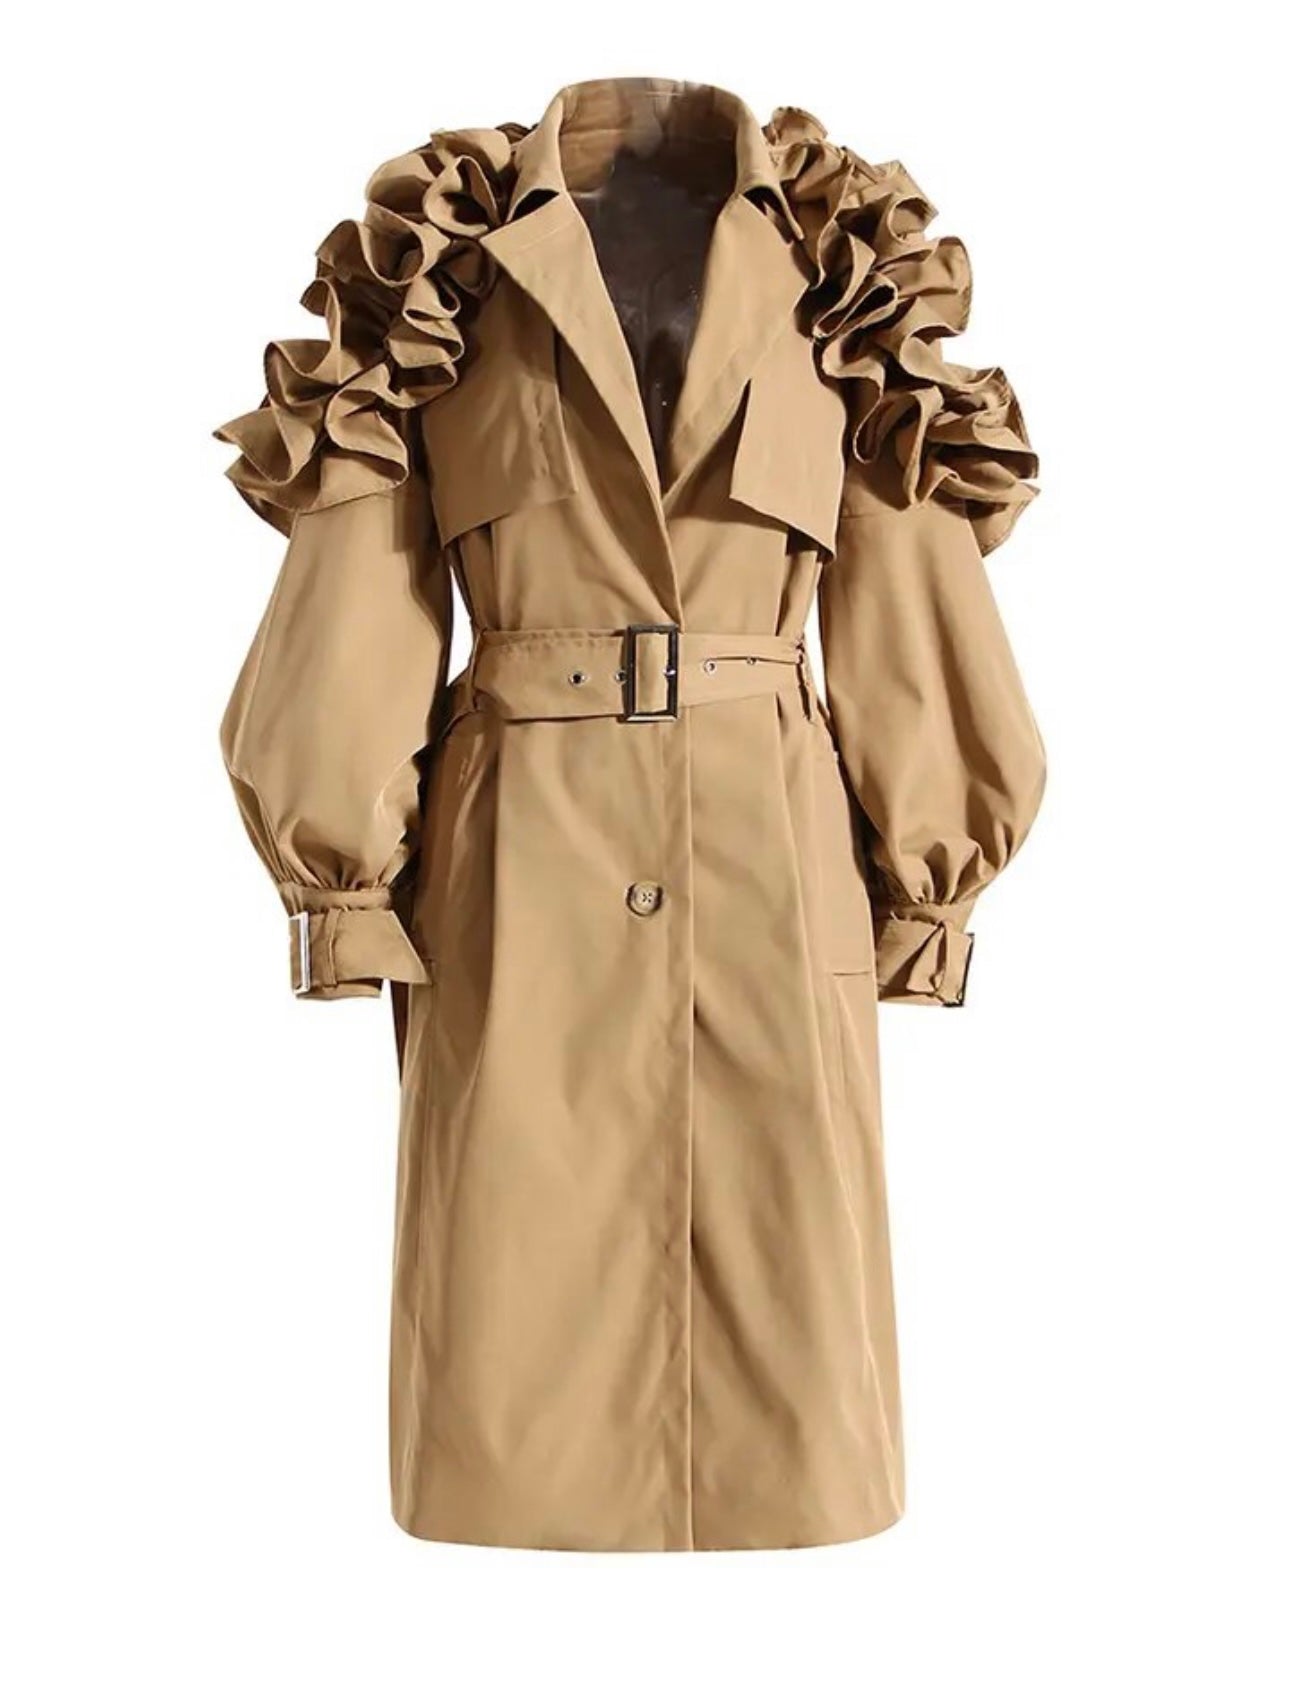 The Trenching Through Fall Coat (Also Comes In Another Color)